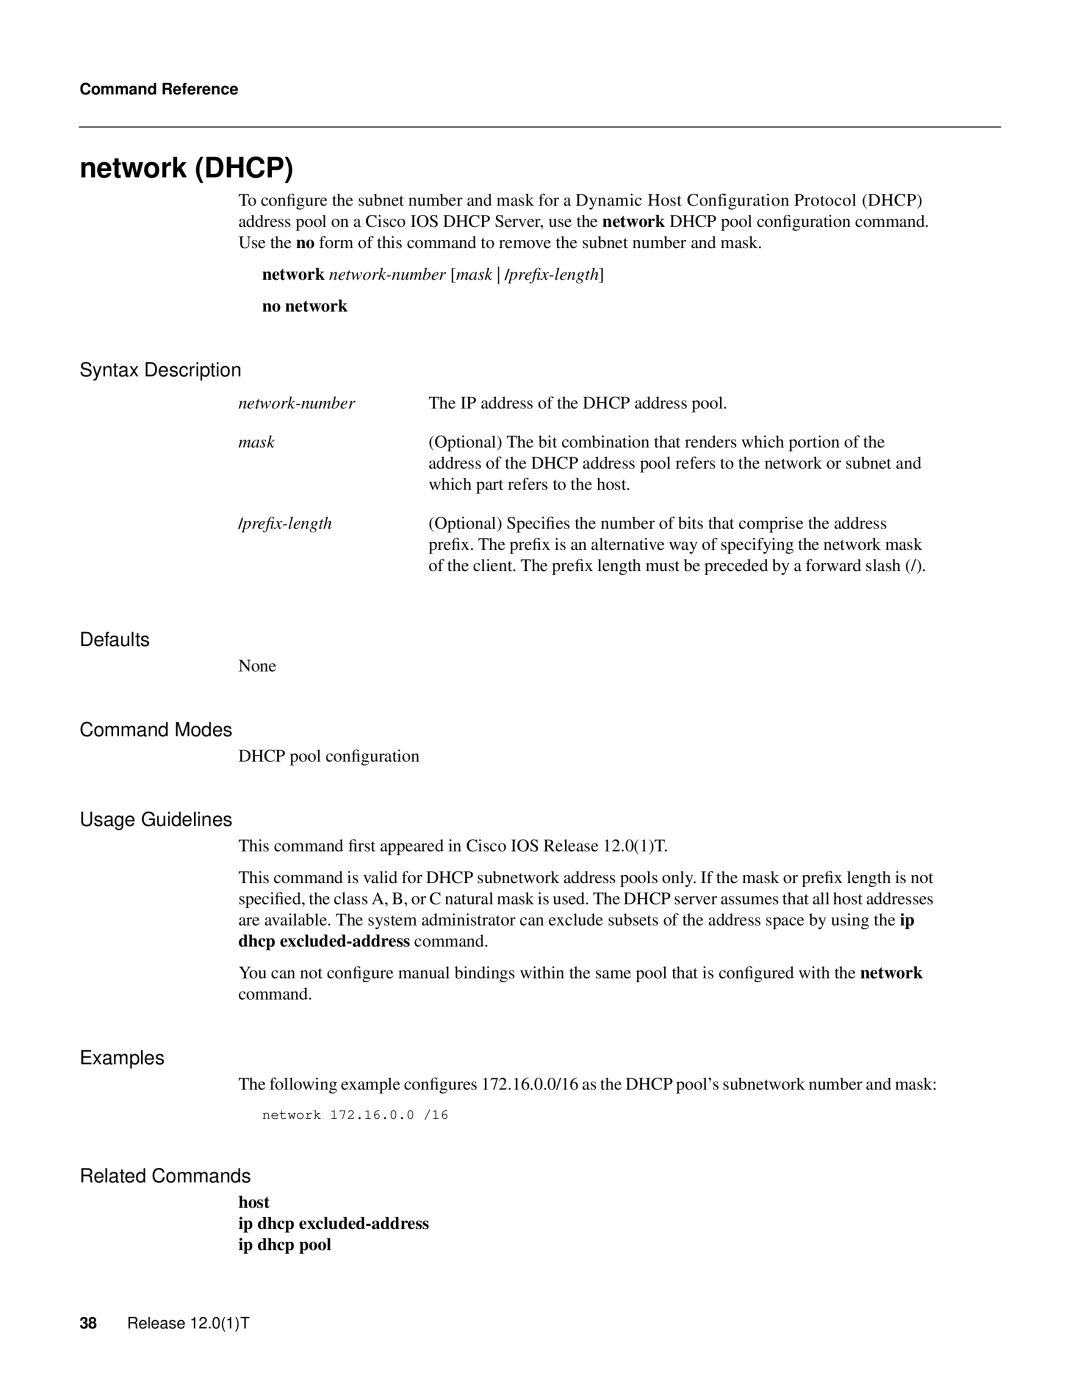 Cisco Systems 32369 network DHCP, network network-number mask /preﬁx-length, no network, which part refers to the host 